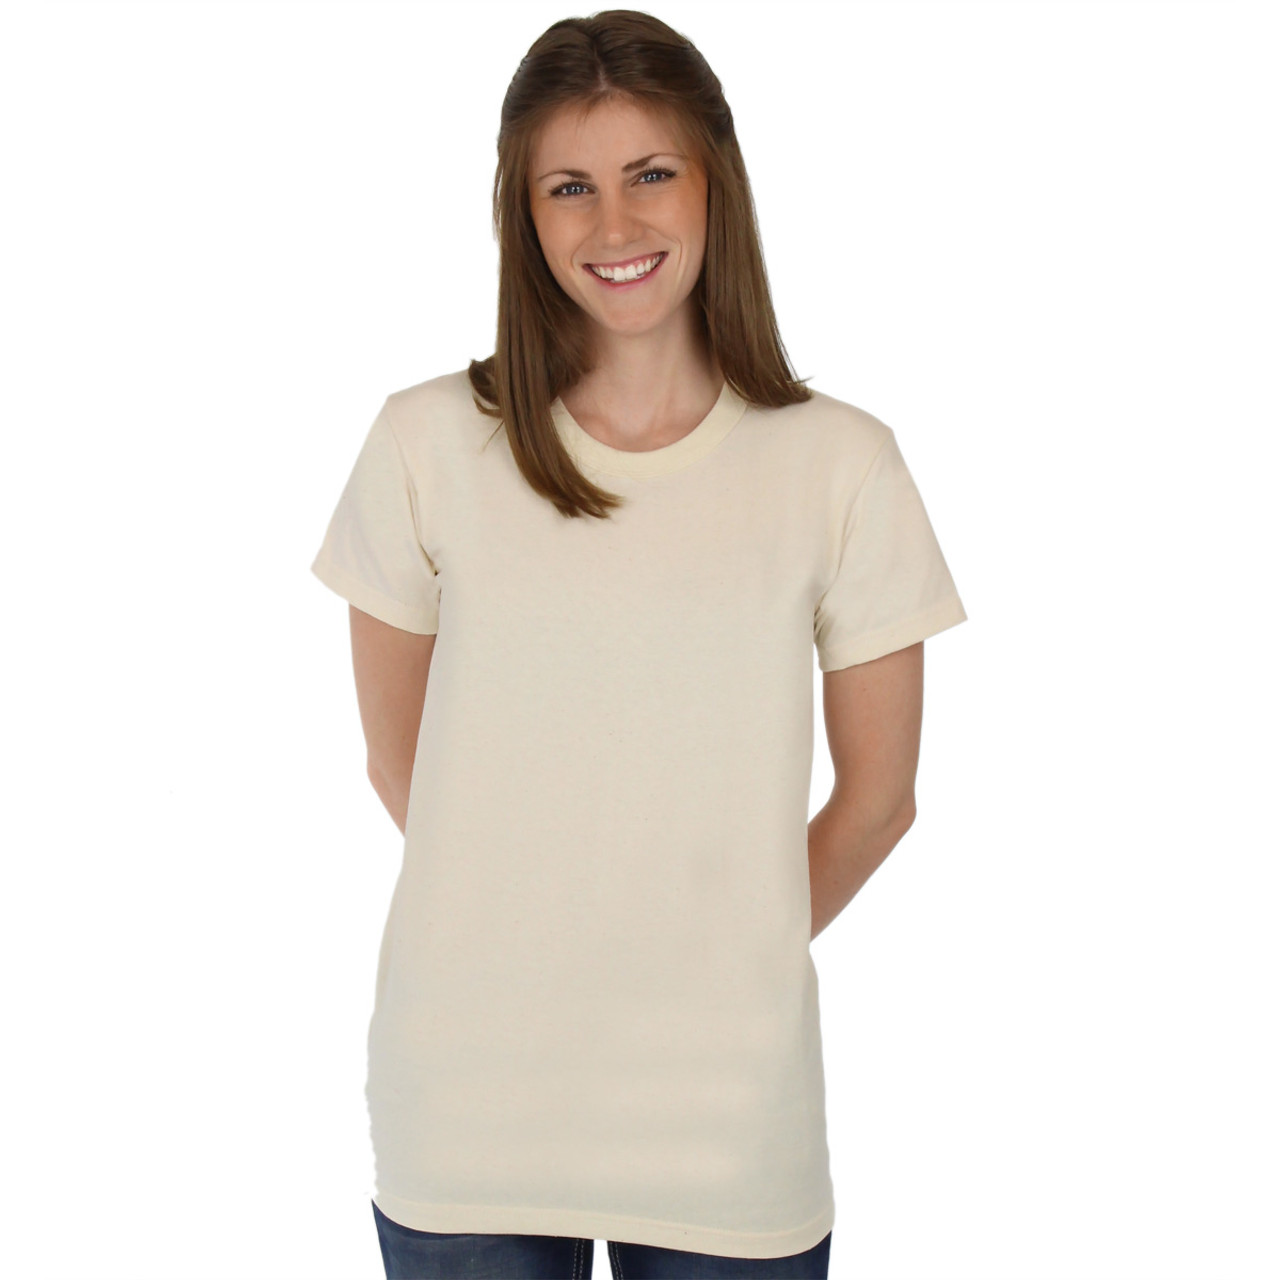 We Grow Organic Cotton T-Shirts – SOS from Texas